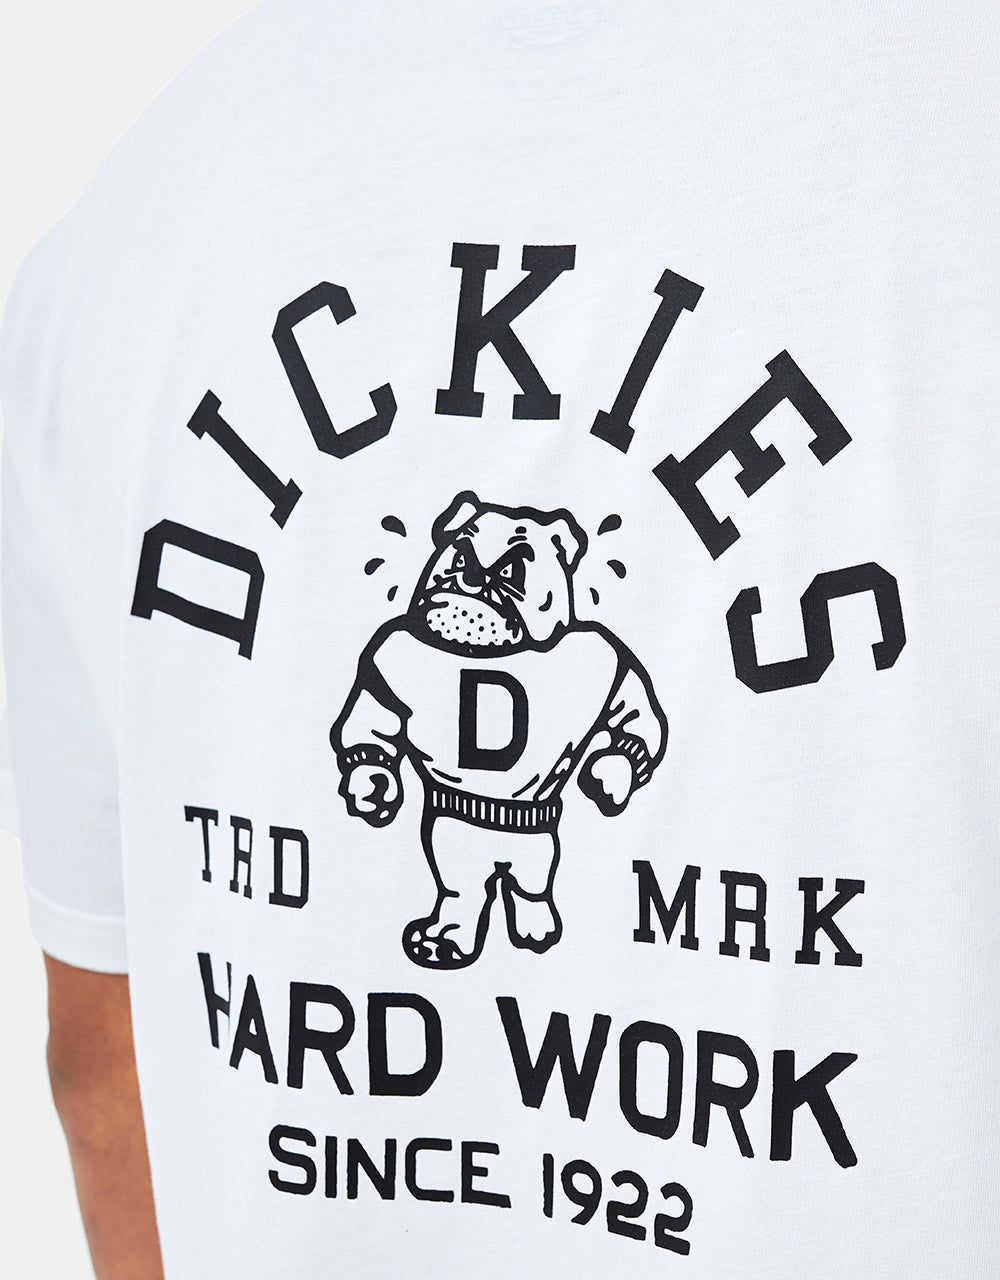 Dickies Cleveland T-Shirt - White